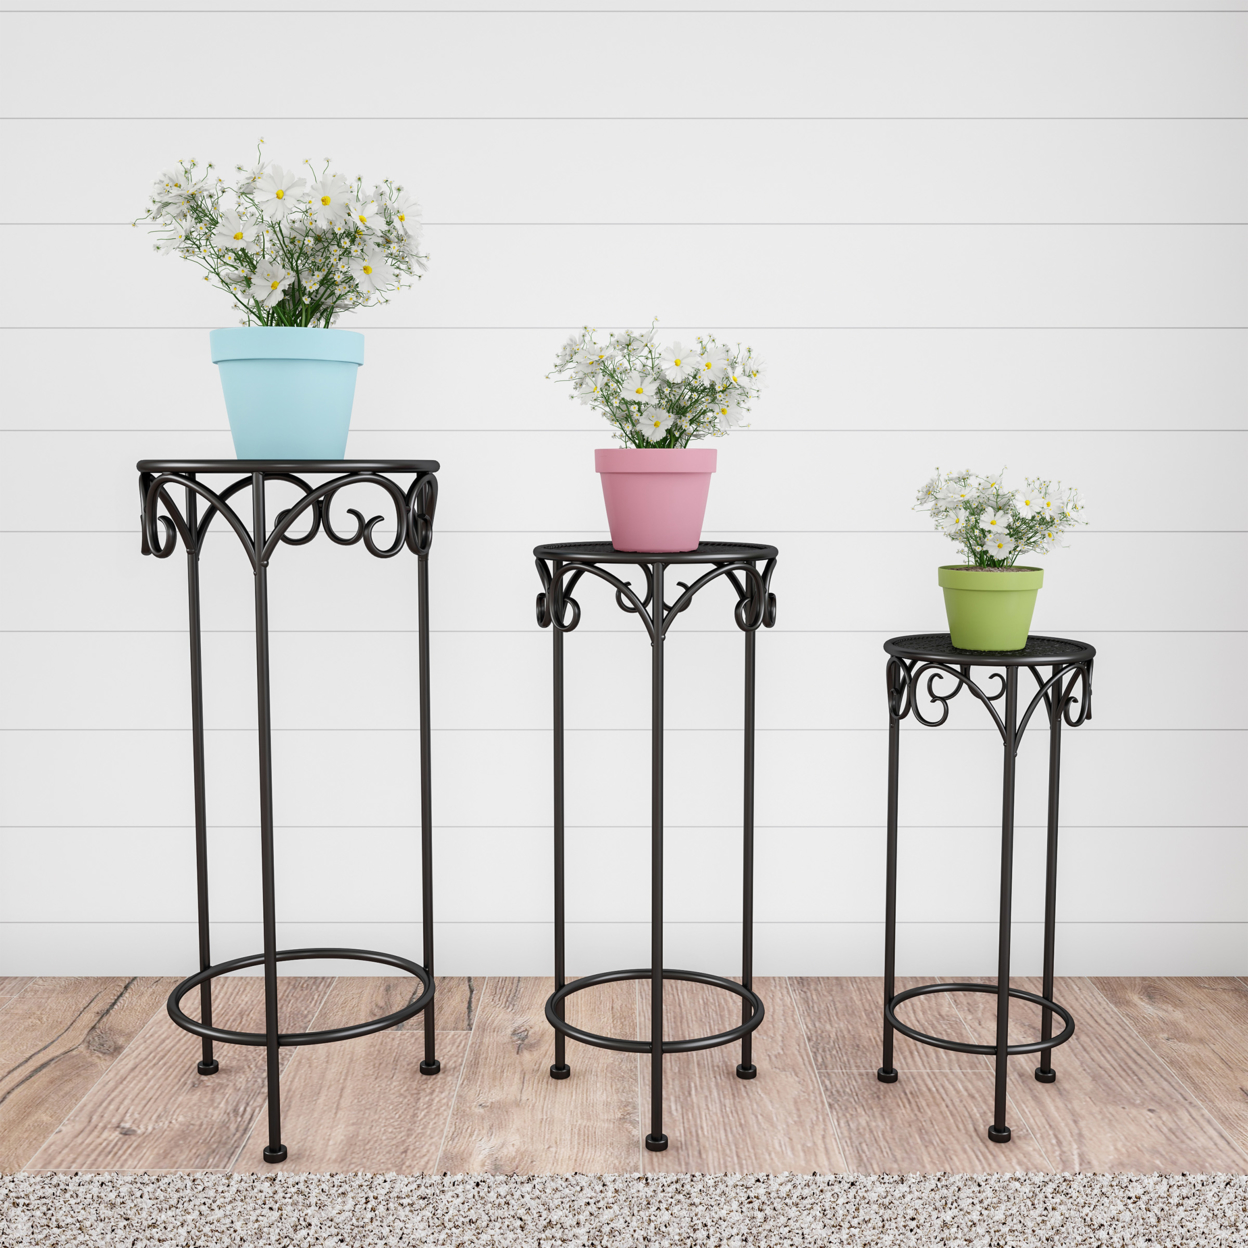 Plant Stands Set Of 3 Indoor Or Outdoor Nesting Wrought Iron Metal Round Decorative Potted Plant Accent